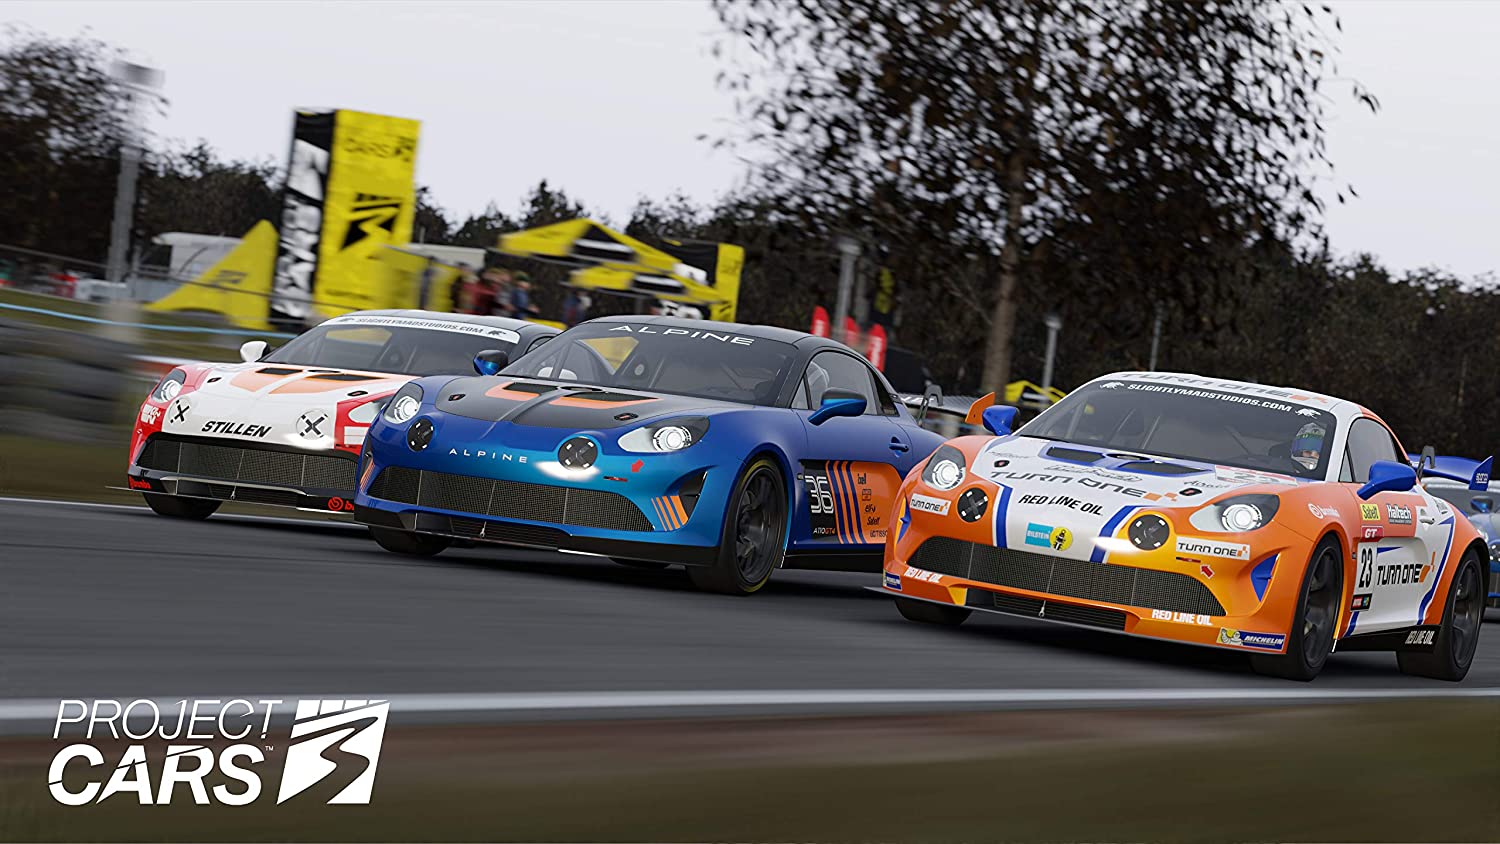 PS4 Project CARS 3 (R3)